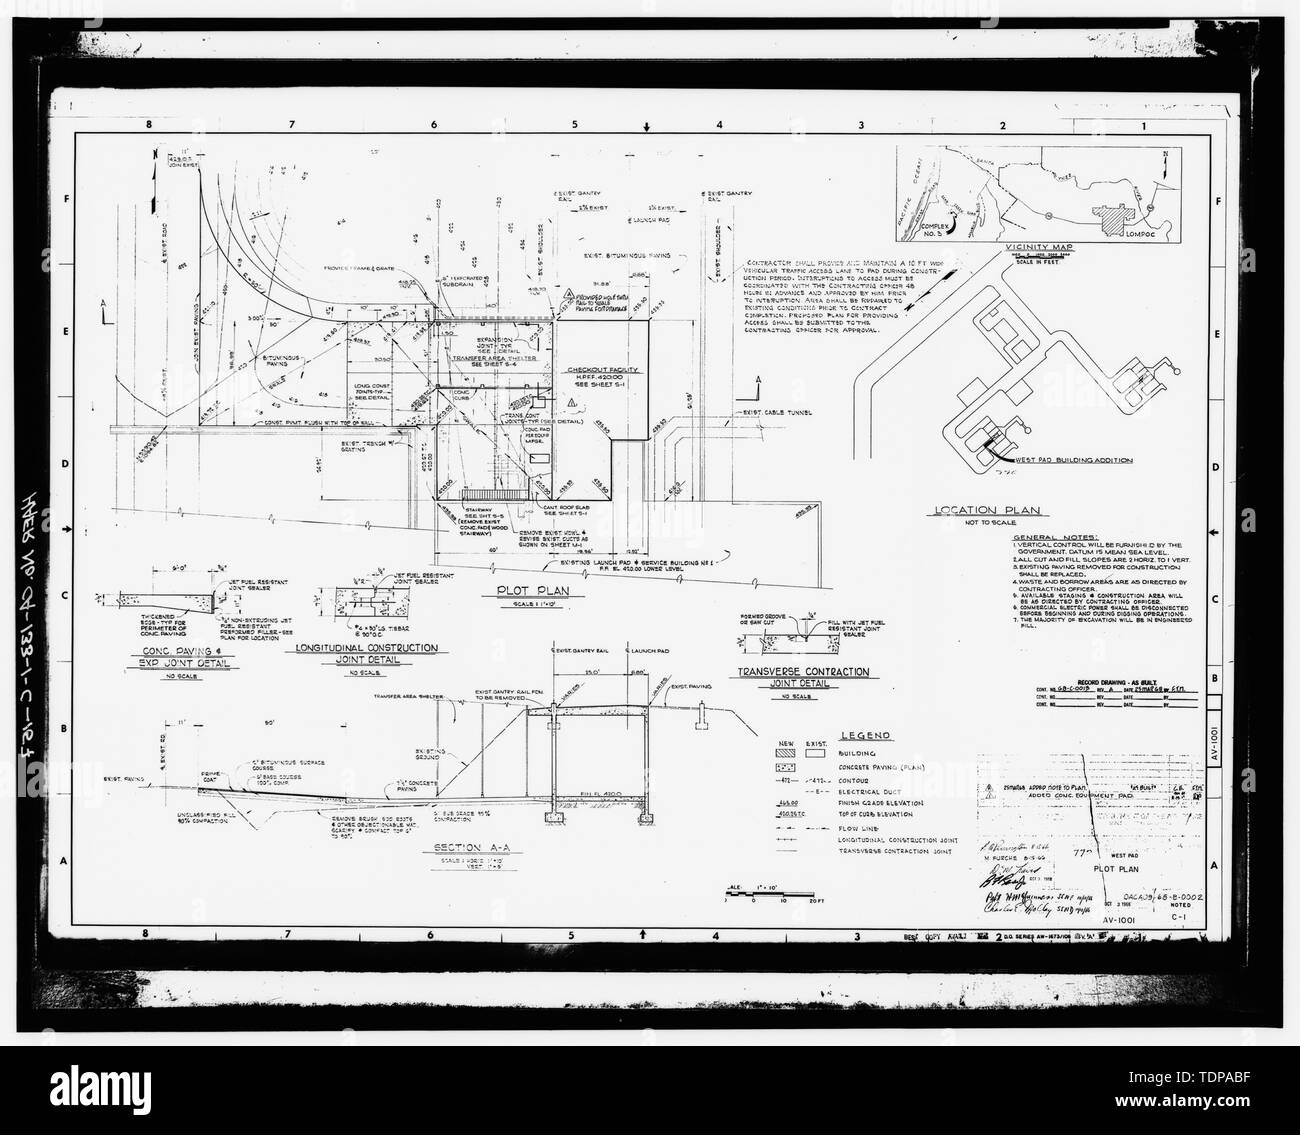 Photocopy Of Drawing 1966 Civil Engineering Drawing By Aetron Plot And Location Plan Sections And Details For The Underground Checkout Facility On The West Pad Sheet C 1 Vandenberg Air Force Base